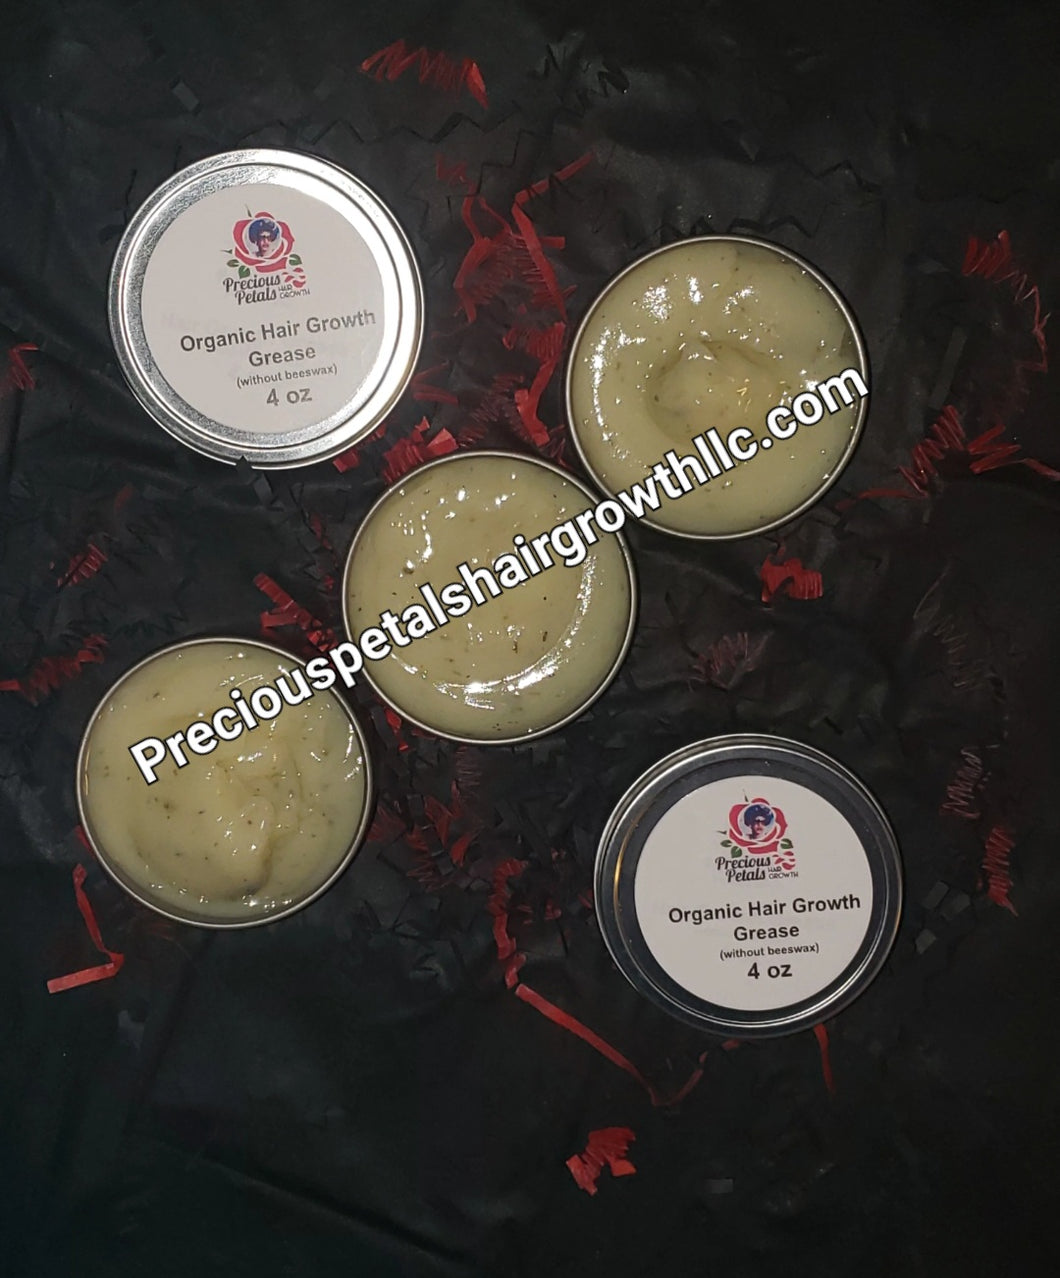 HAIR***Organic Hair Growth Grease (without beeswax)